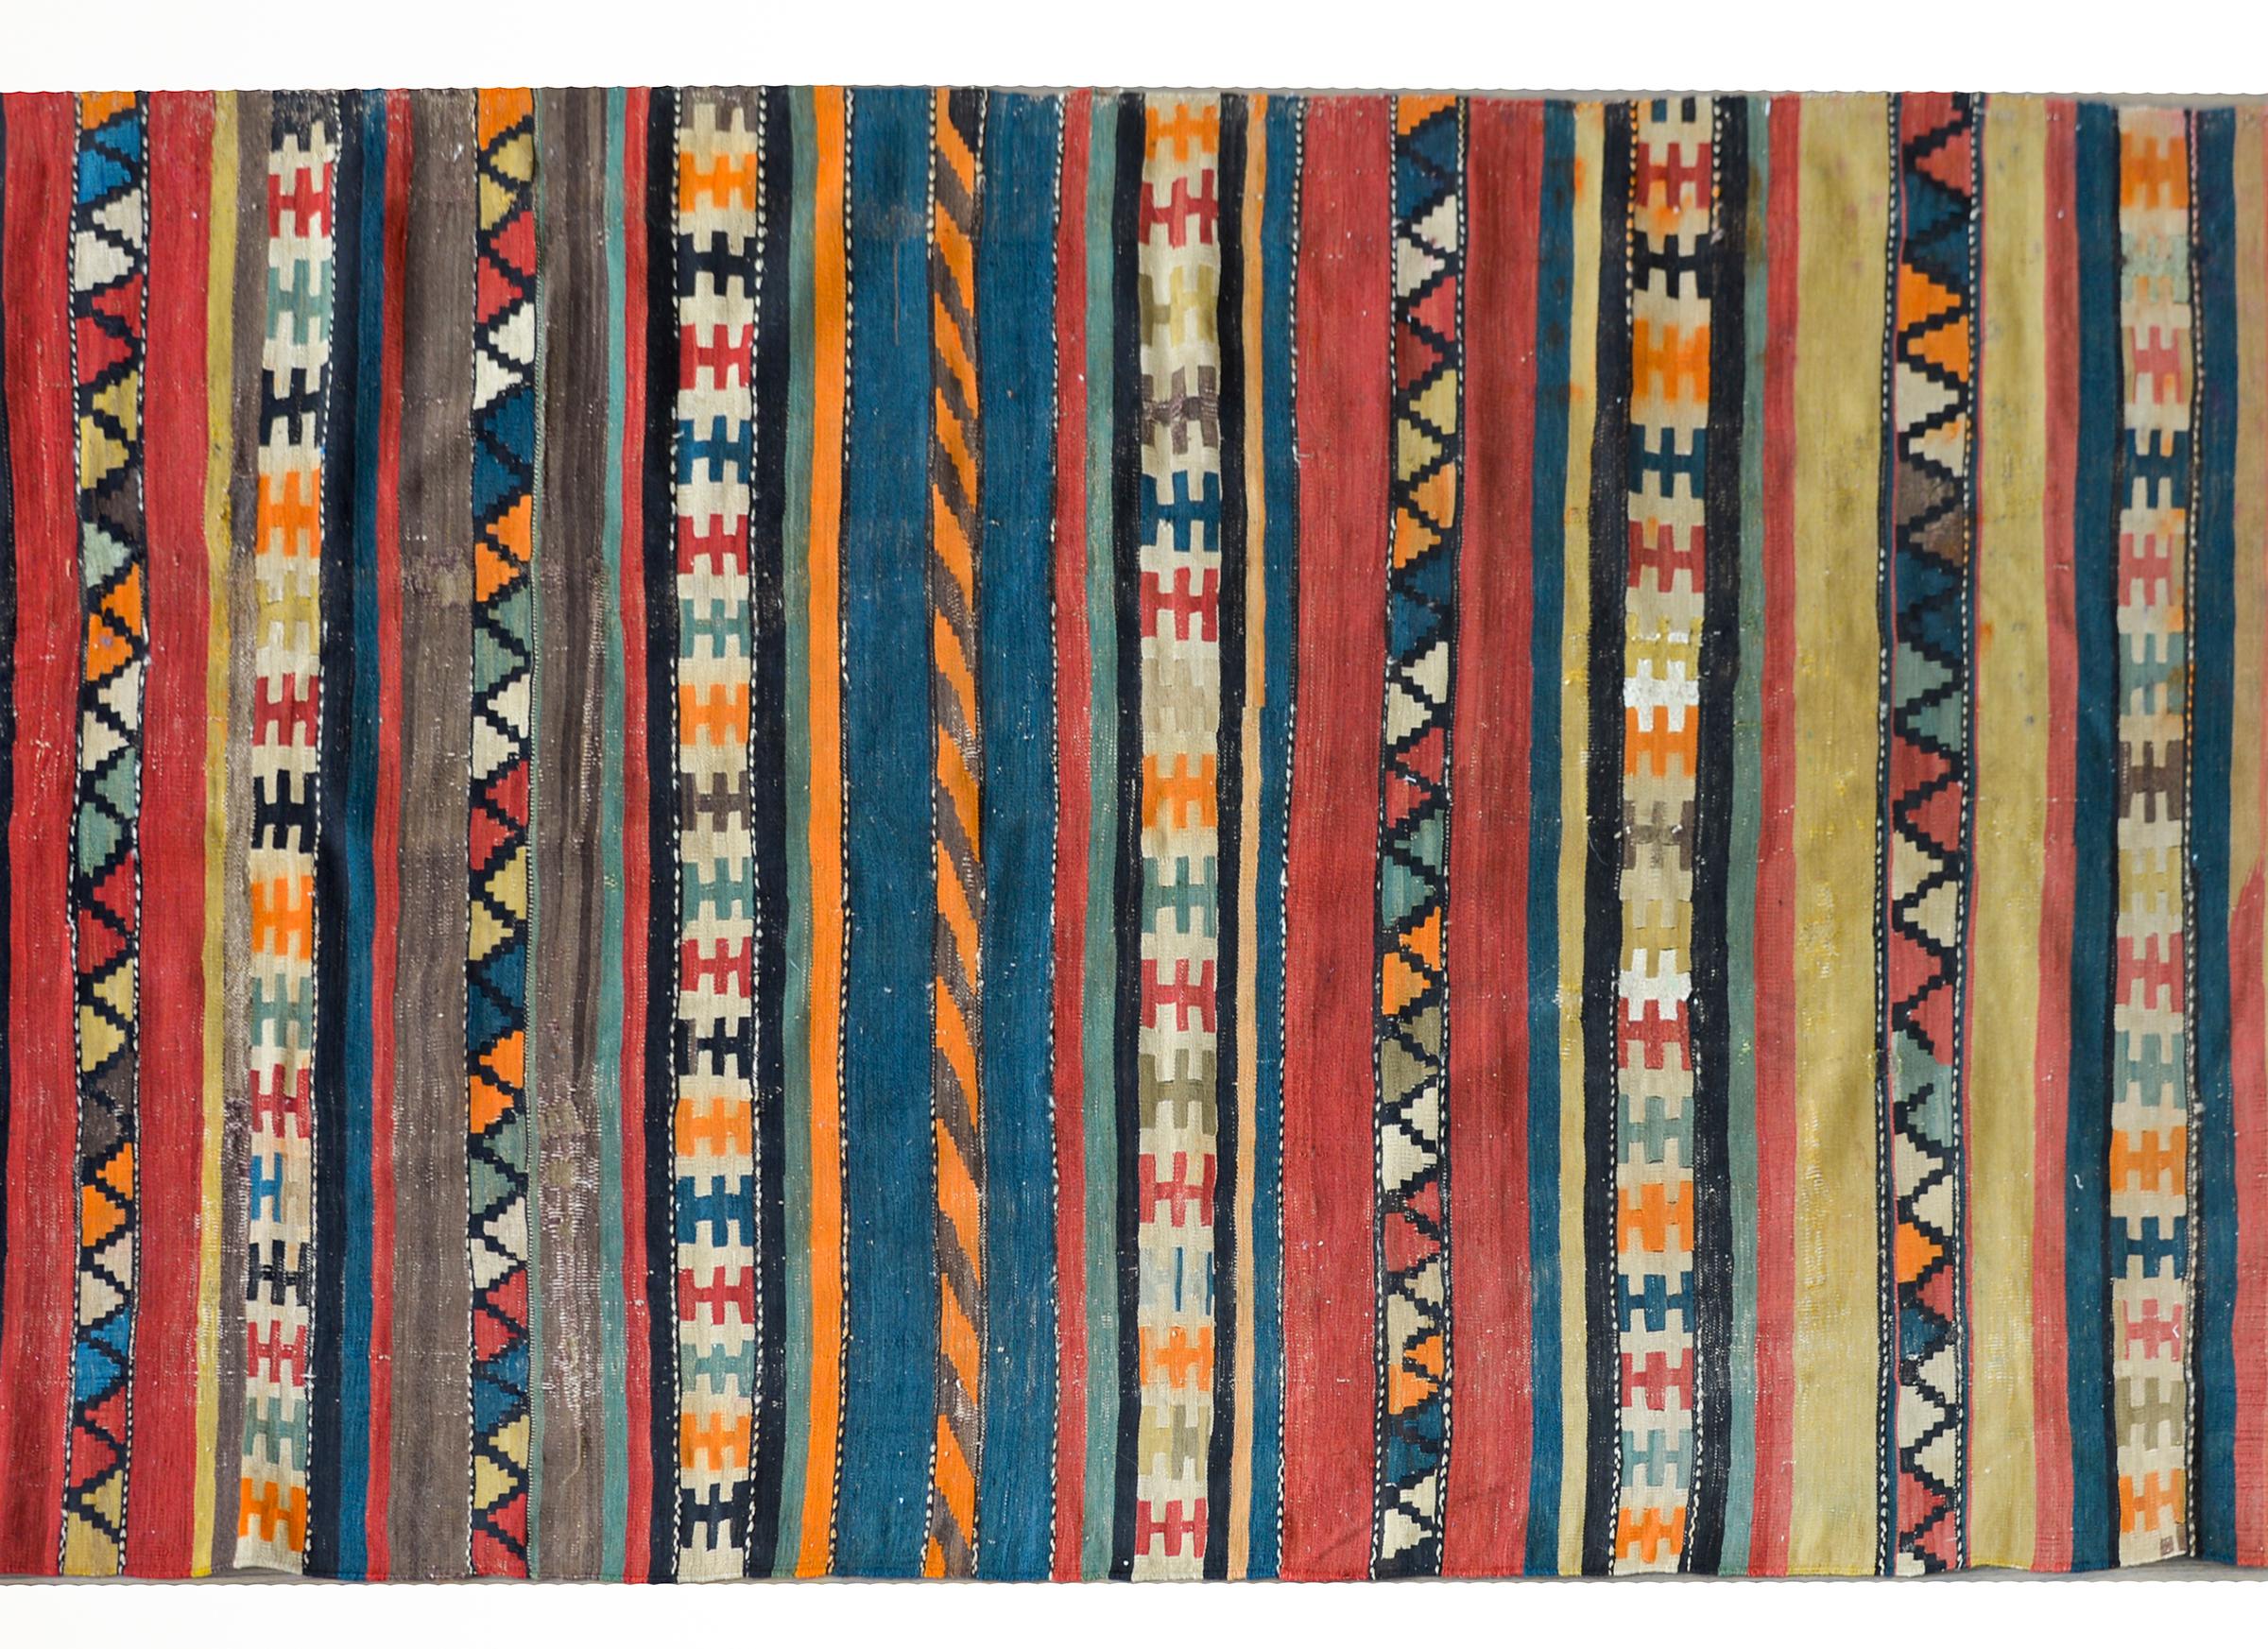 A wonderful early 20th century Persian Shahsevan kilim runner with myriad multi-colored stripes, some solid, and some with geometric patterns, and all woven in brilliant bold colors.